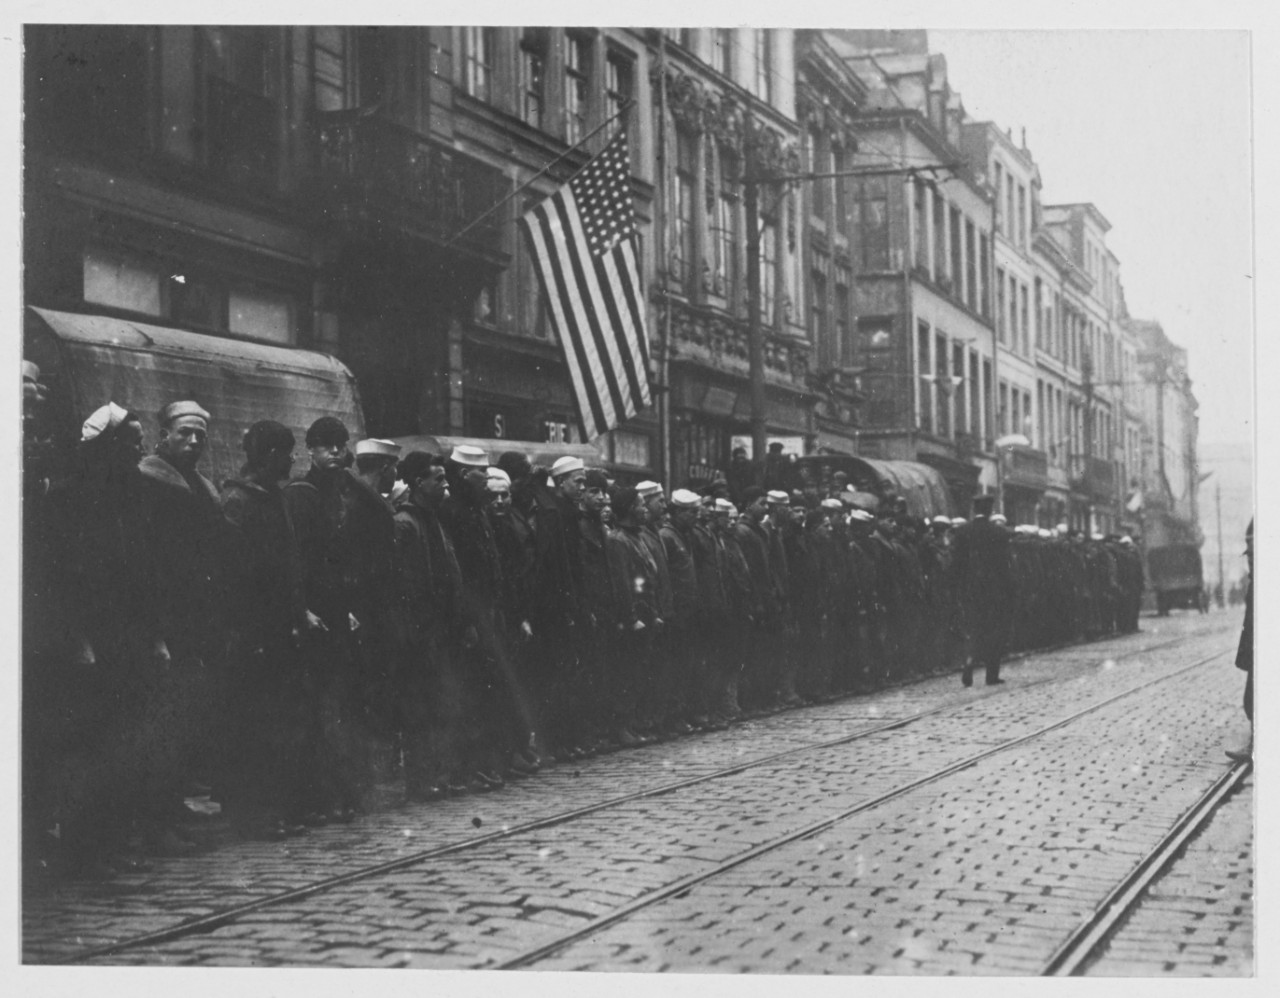 Navy men at relief headquarters, Lille, France. American flag above rows of men